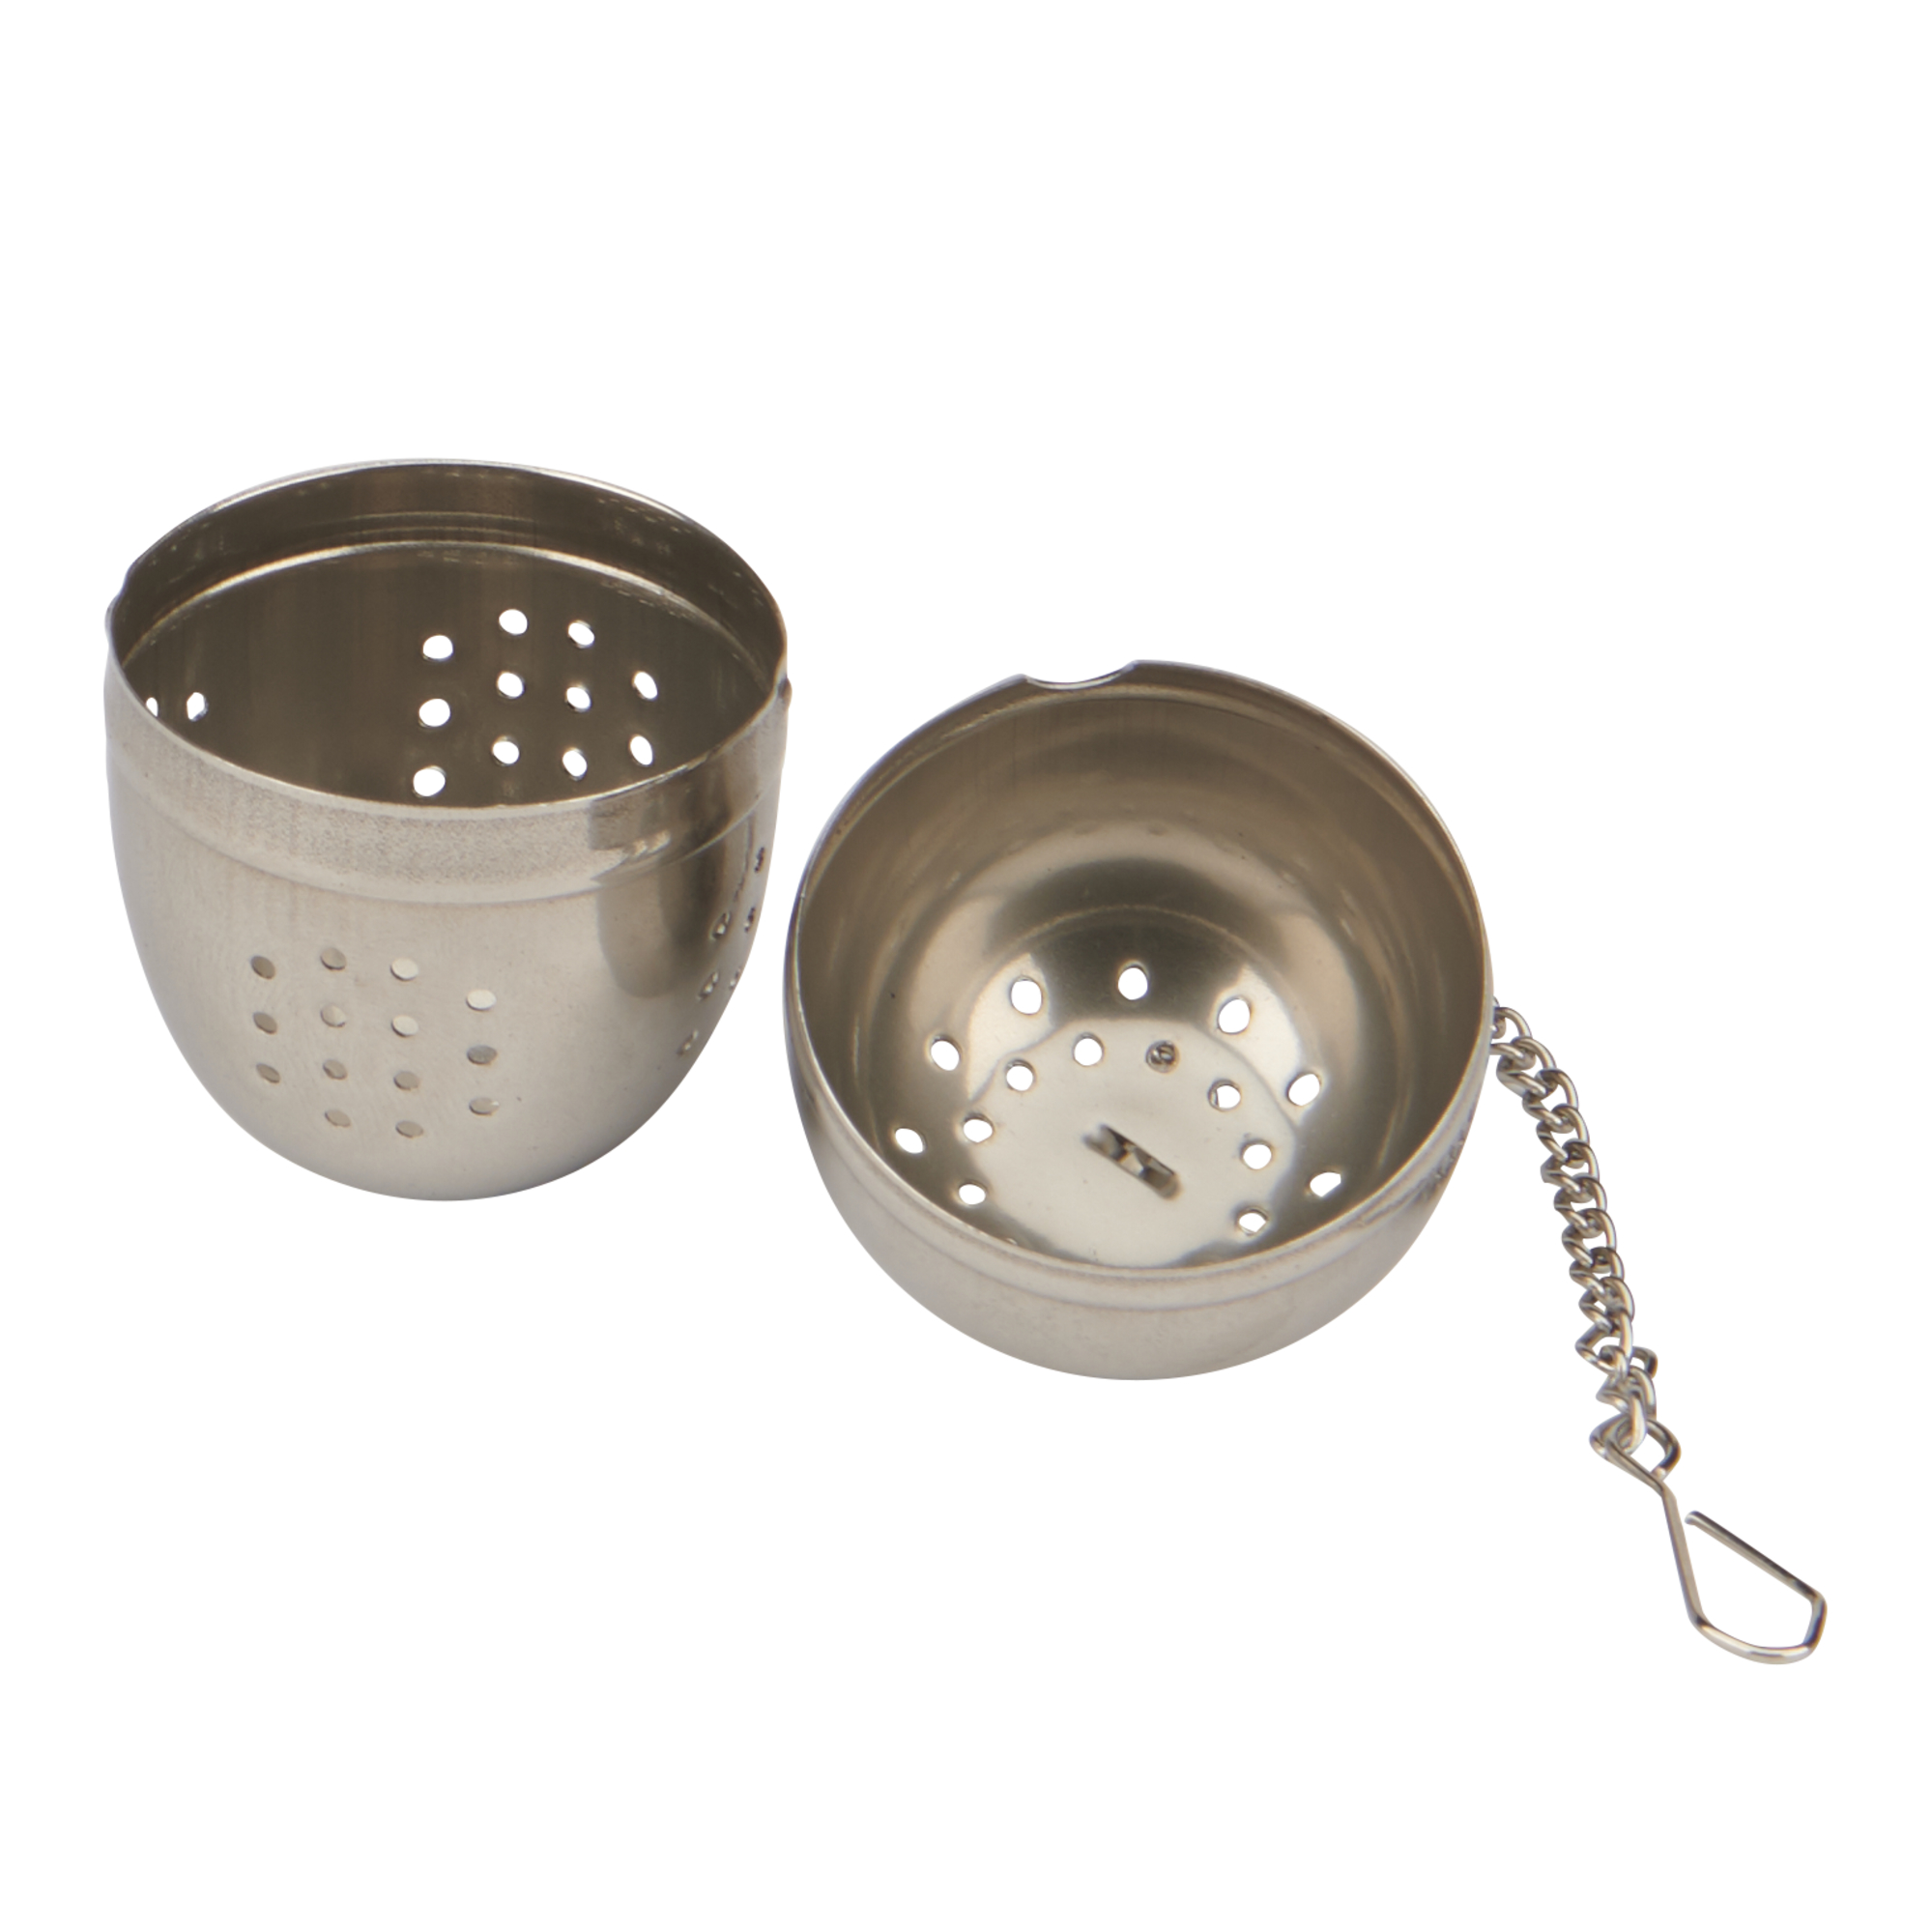 25090_GoodCook_Everyday_Stainless Steel Teaball_Feature 1.psd